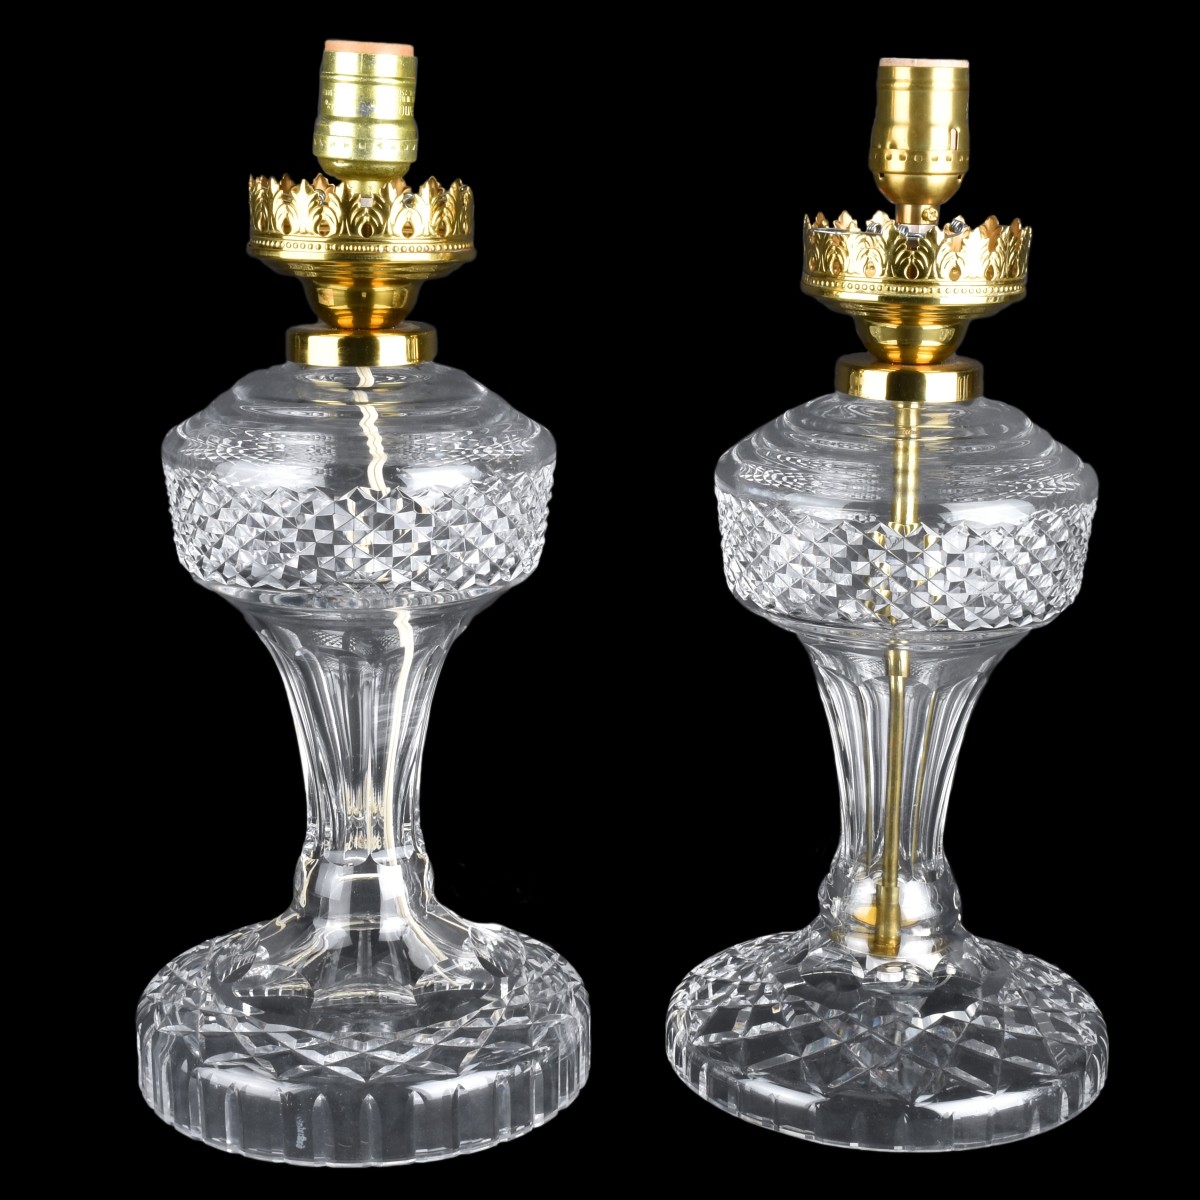 Two Waterford Hurricane Lamps